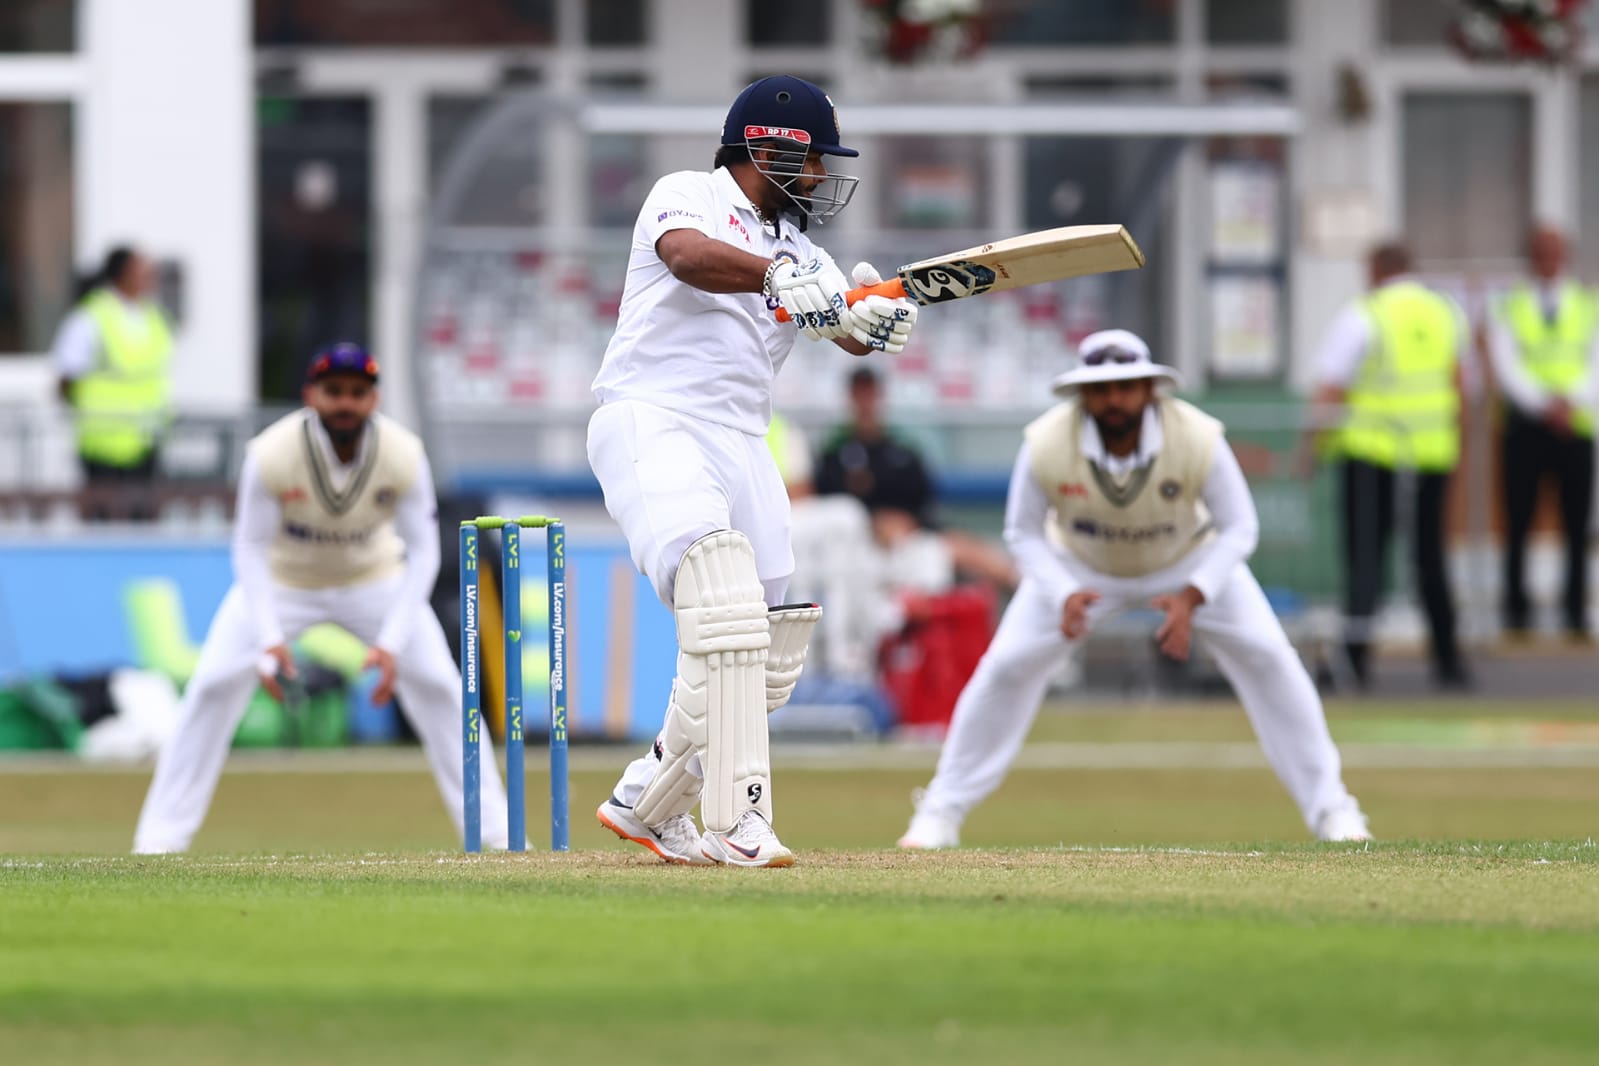 India vs Leicestershire Live: BIG RELIEF for Team India, Rishabh Pant returns to form with fantastic FIFTY in WARM-UP against Leicestershire: Watch Highlights